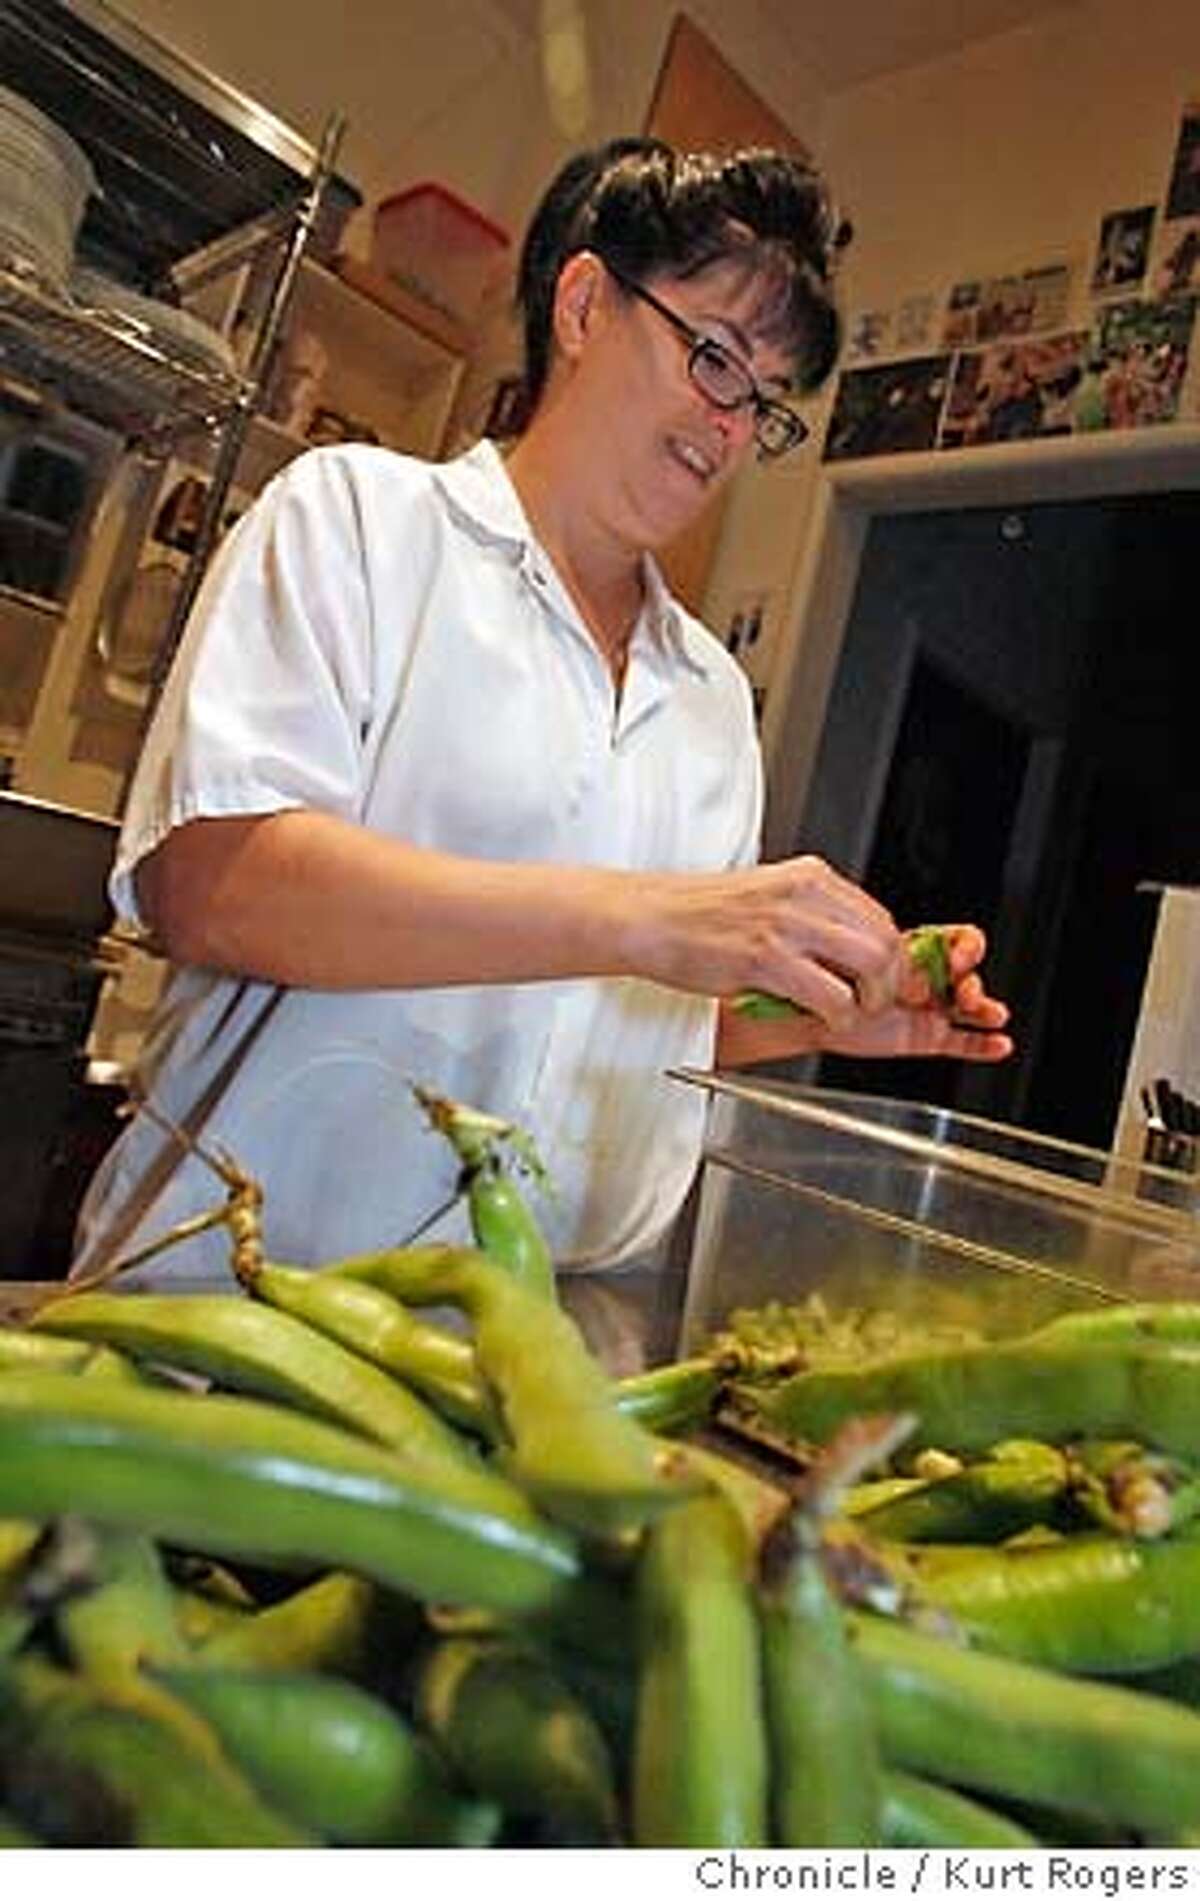 Christine Mullen the Chef at Cav on Market St Prepping Fava beans inn the kitchen. THURSDAY, APRIL 19, 2007 KURT ROGERS SAN FRANCISCO THE CHRONICLE KURT ROGERS/THE CHRONICLE SEASONAL25_0026_kr.jpg MANDATORY CREDIT FOR PHOTOG AND SF CHRONICLE / NO SALES-MAGS OUT